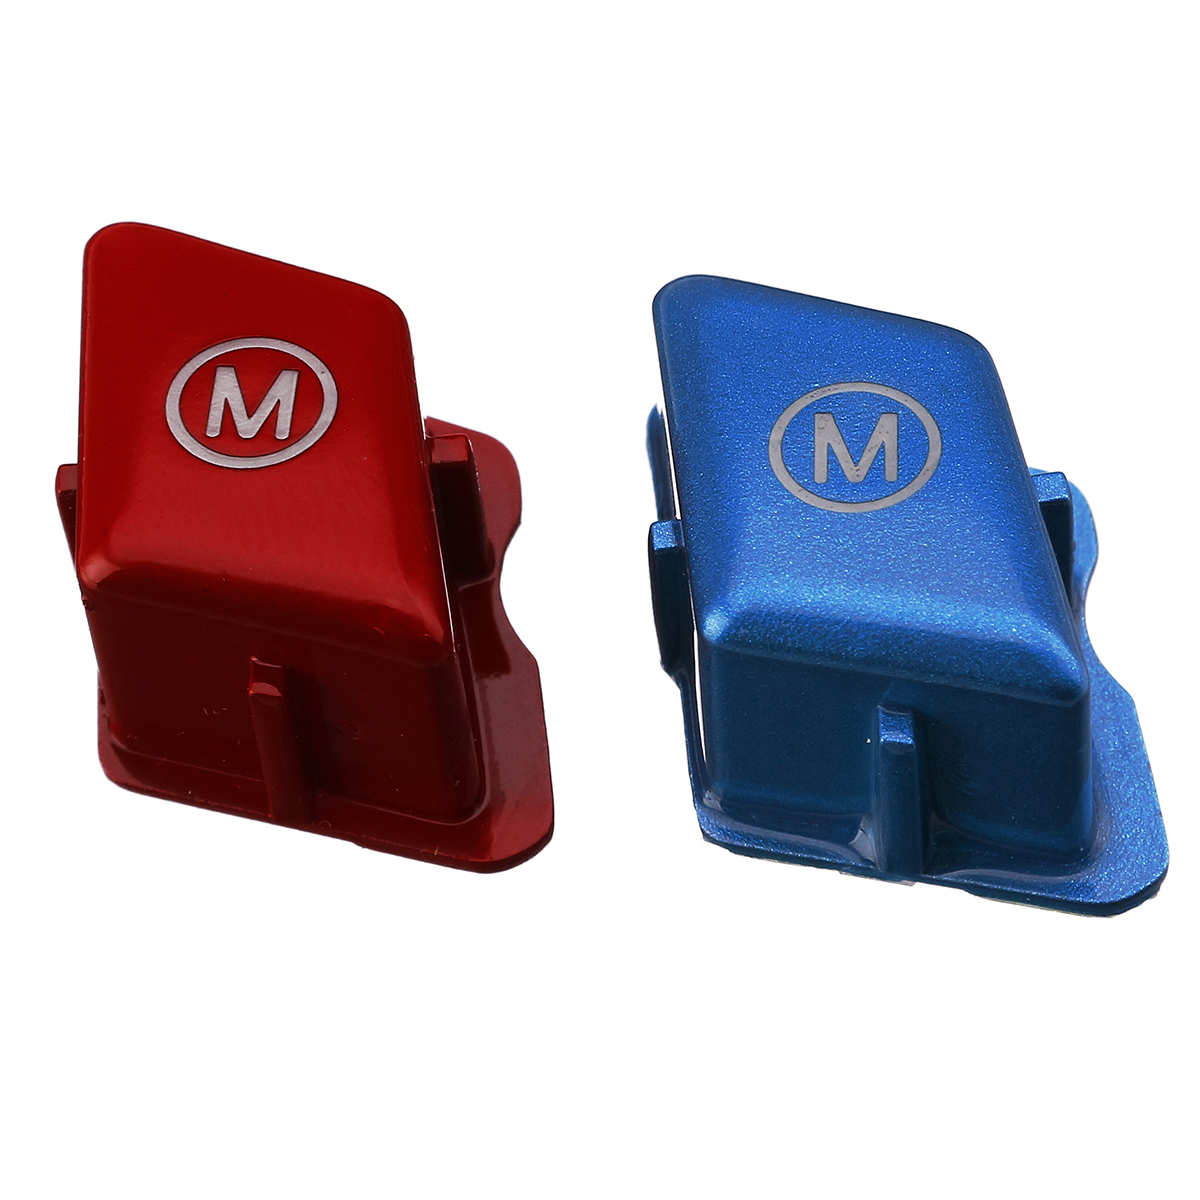 

Car Steering Wheel Switch Button M Blue/Red For BMW 3 Series E90 E92 E93 M3 2007-2013